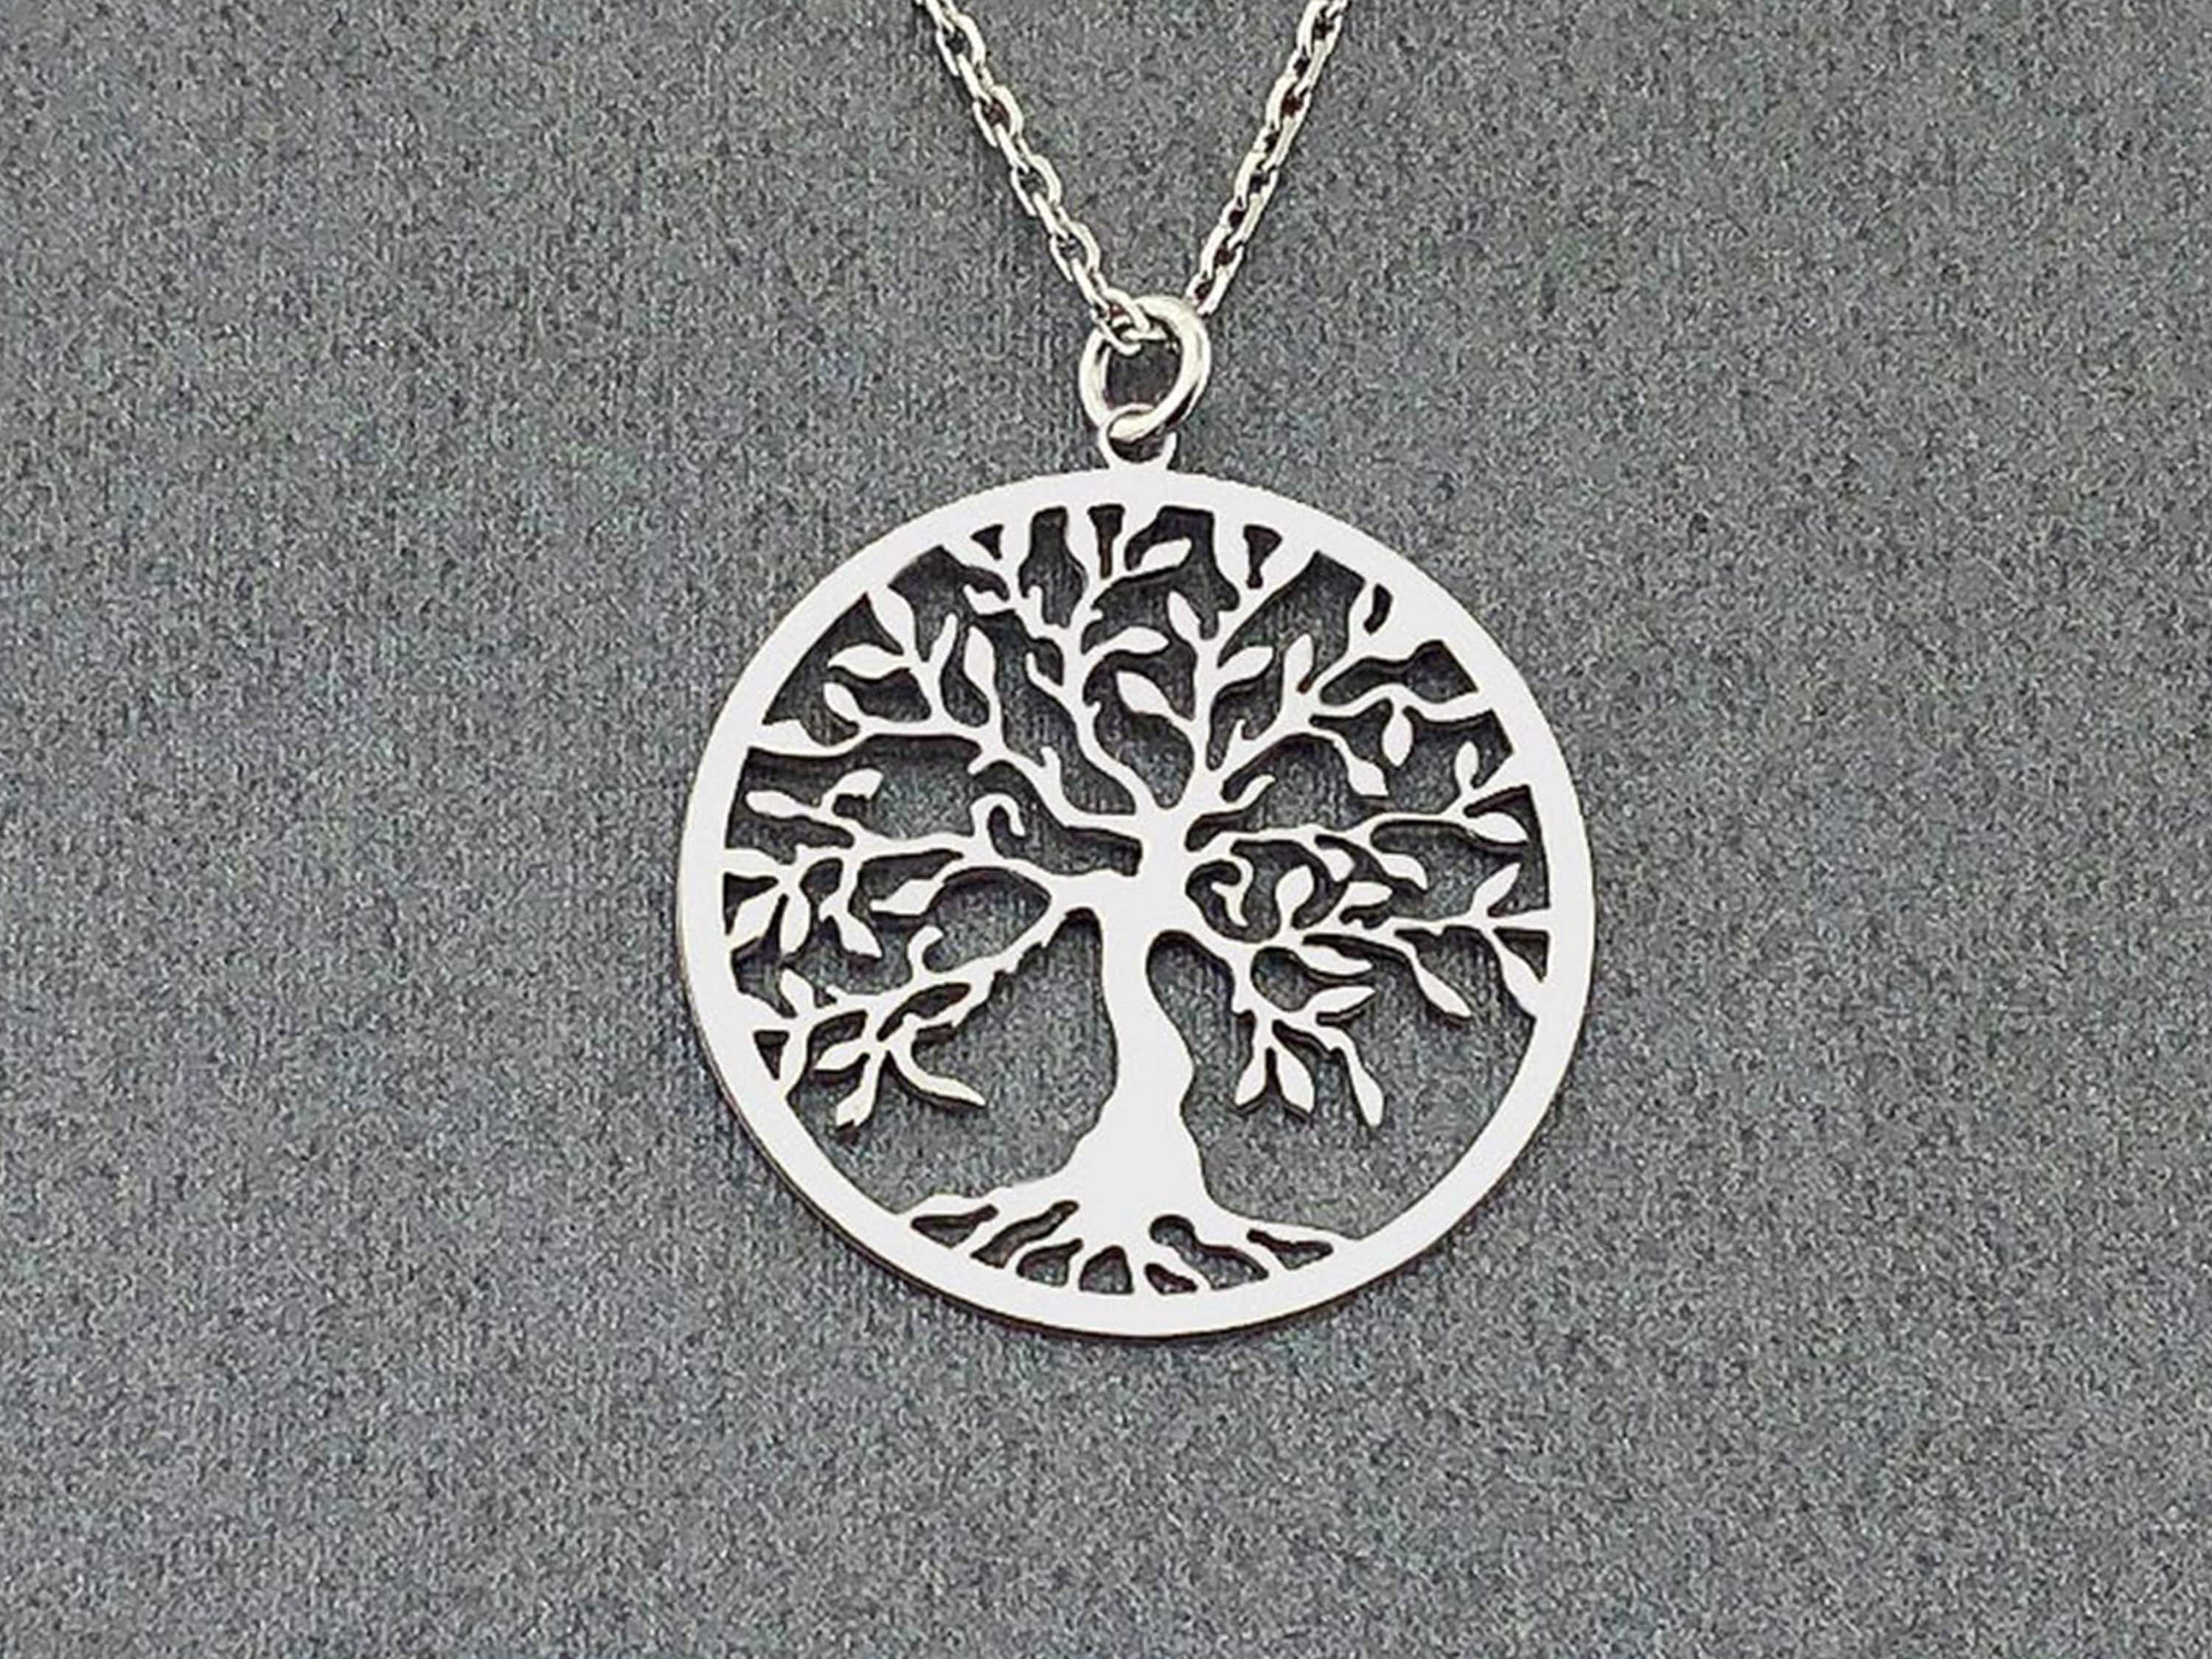 Tree of Life Locket Necklace Jewelry for Women Sterling Silver Celtic  Family Tree Abalone Shell Lockets Jewelry Gifts for Mom Daughter at Rs  77.97 | खरे चांदी का गले का हार -